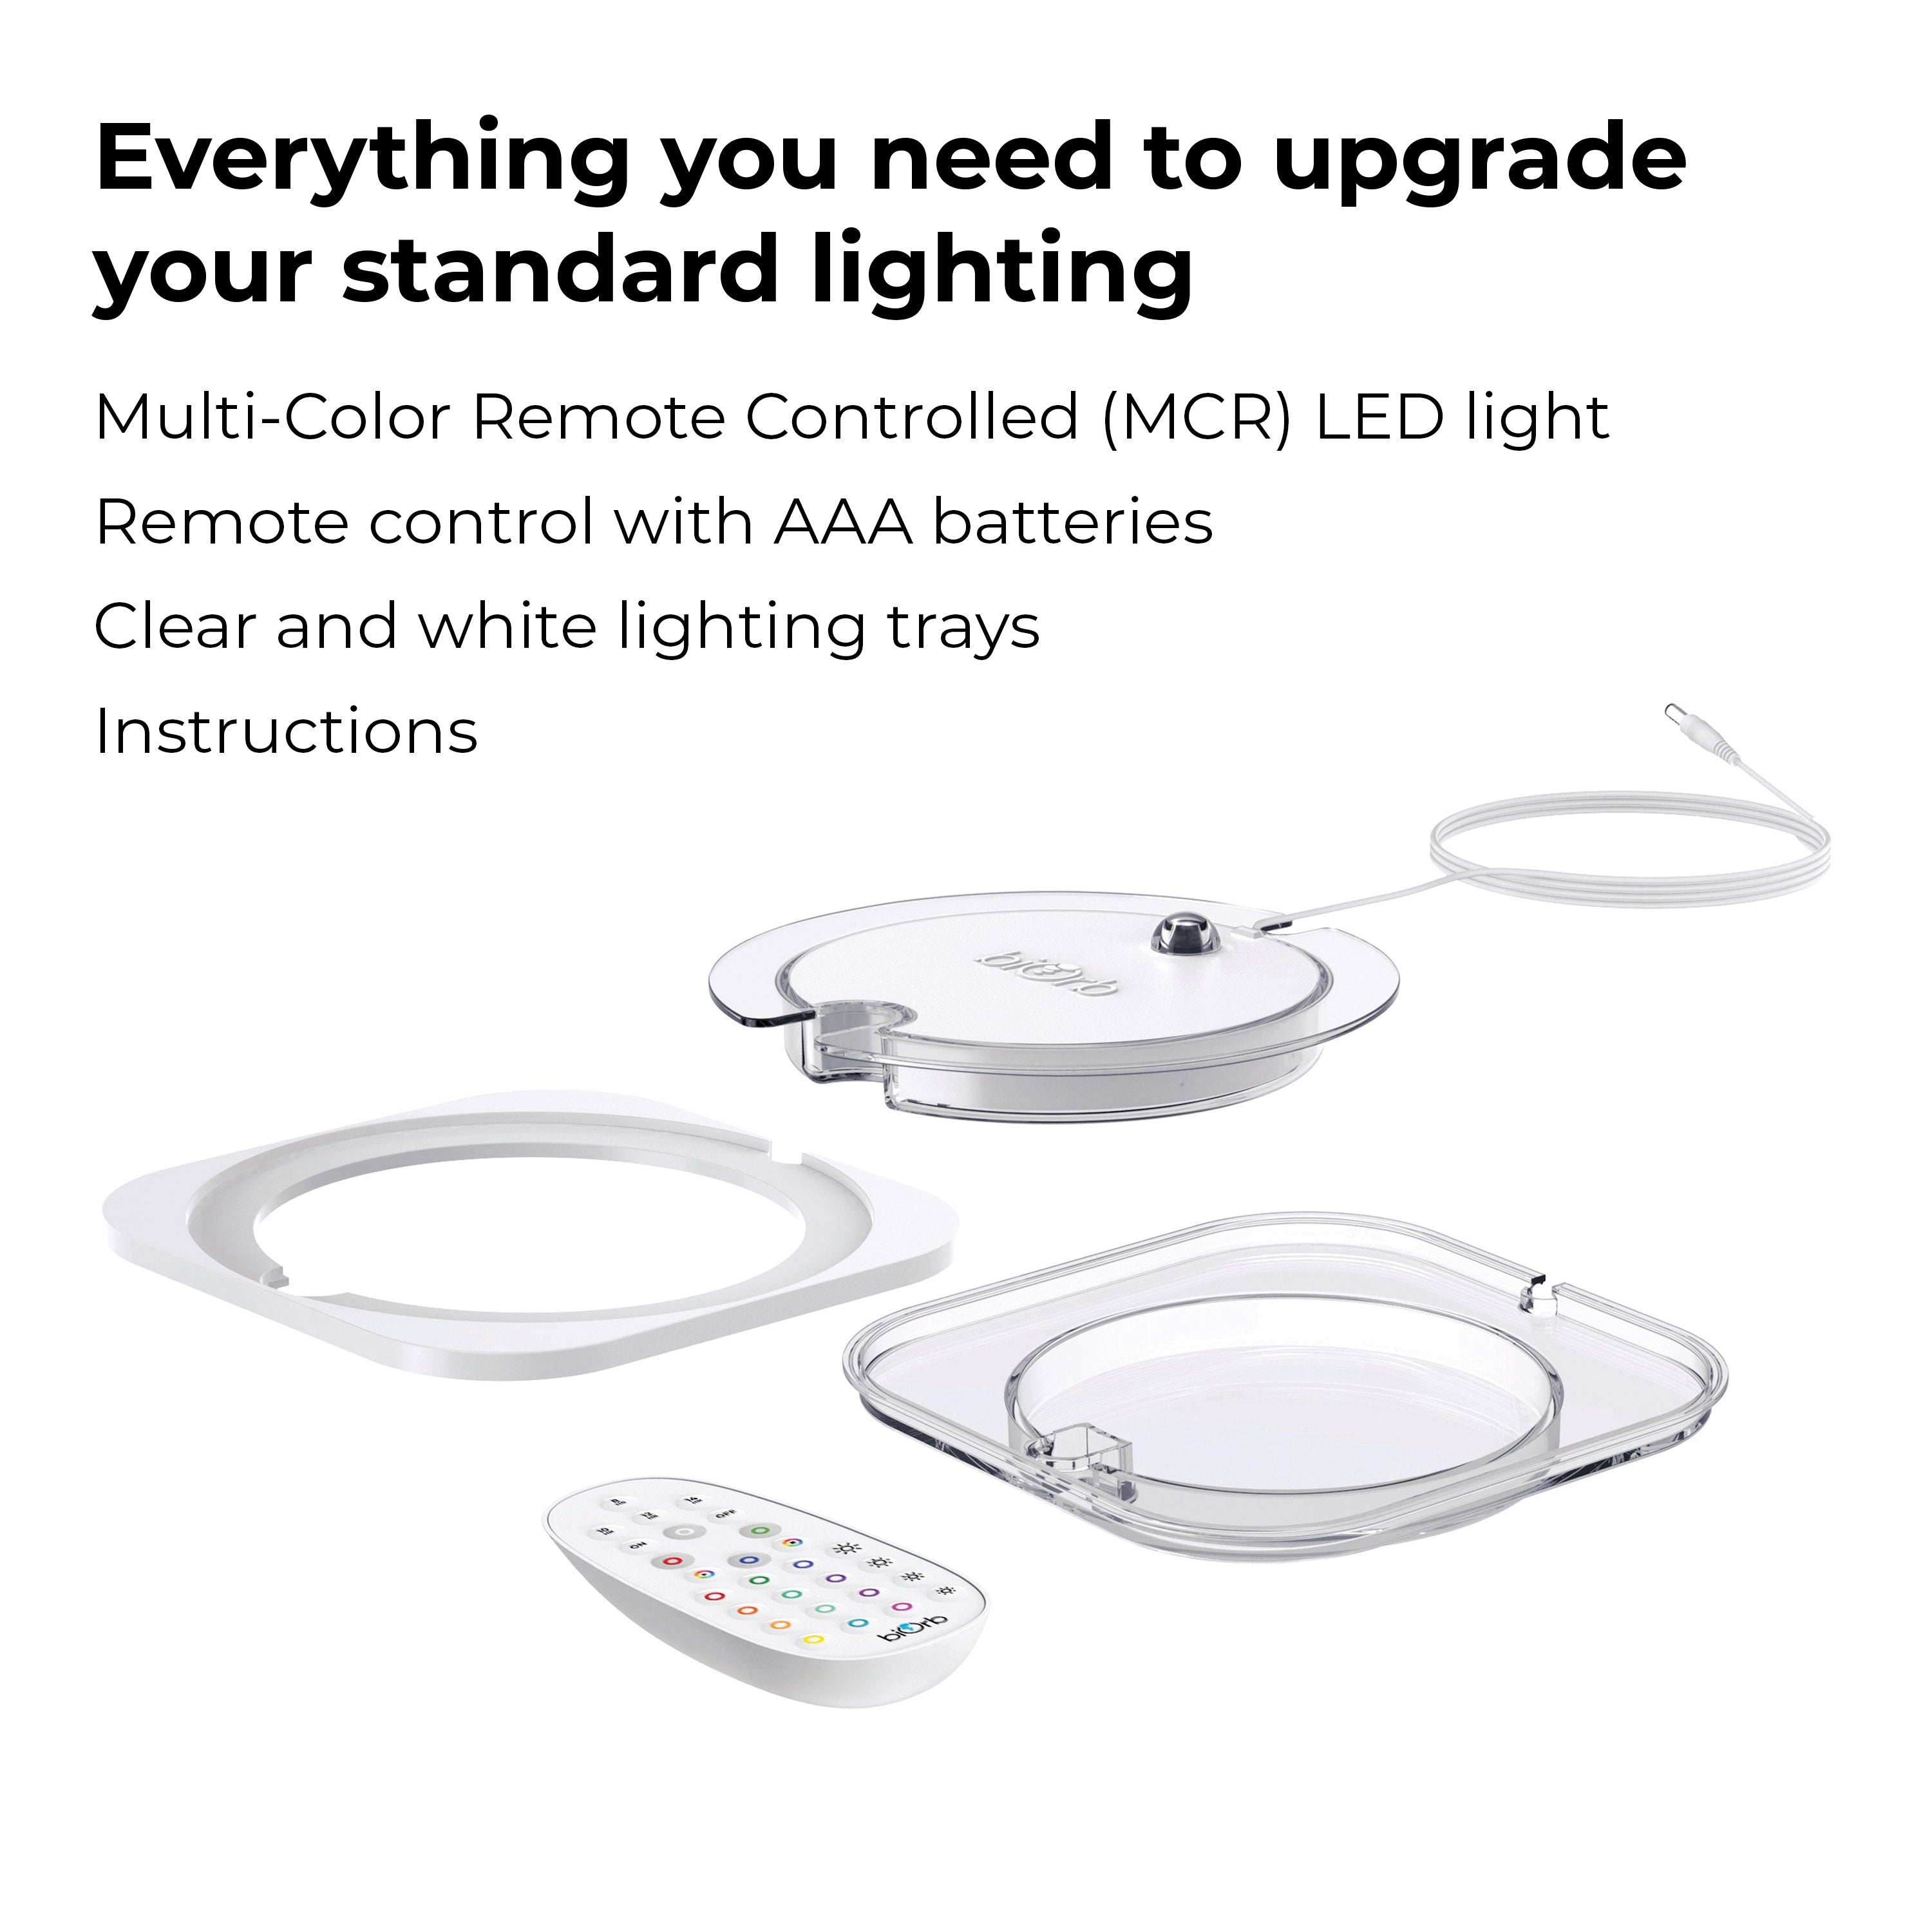 MCR LED Large Light Accessory - Everything you need to upgrade your standard lighting